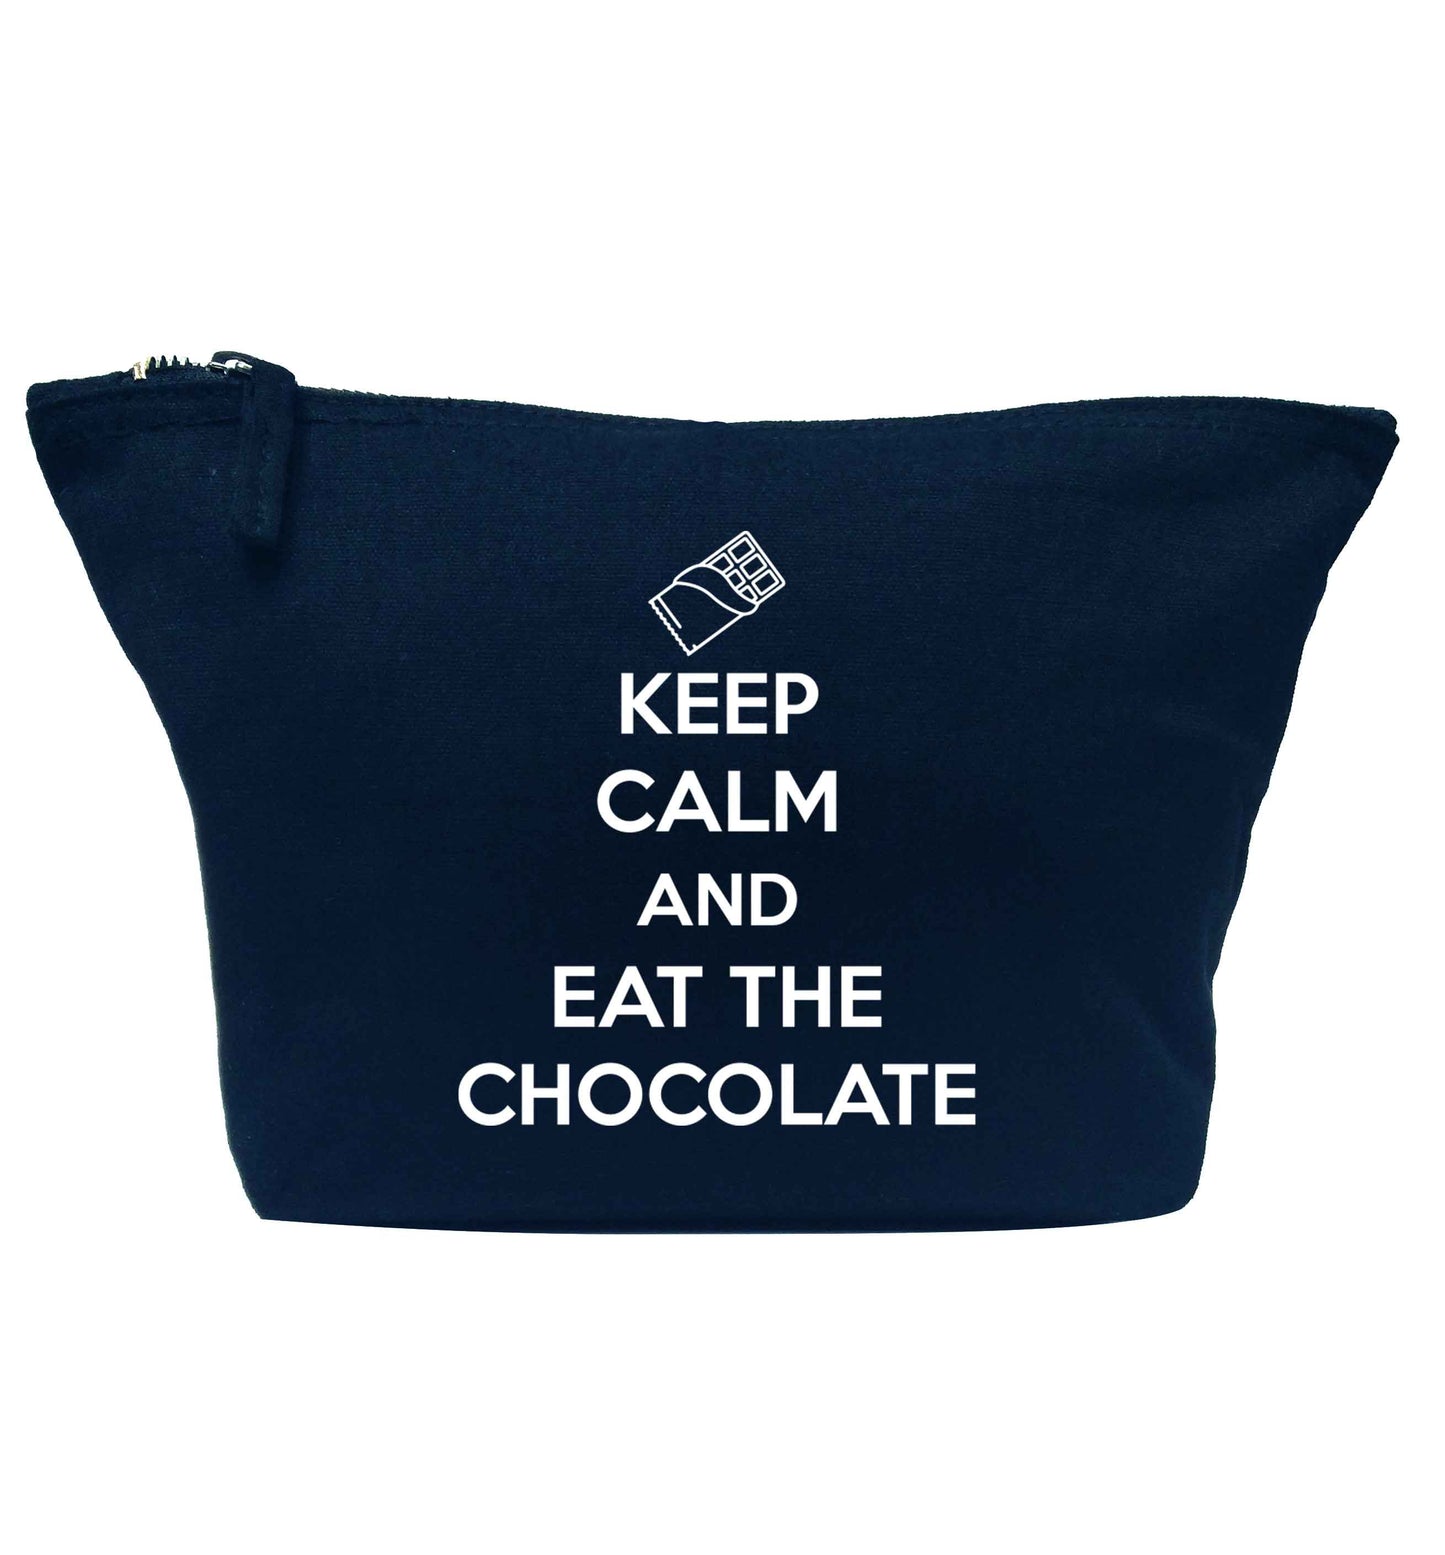 funny gift for a chocaholic! Keep calm and eat the chocolate navy makeup bag